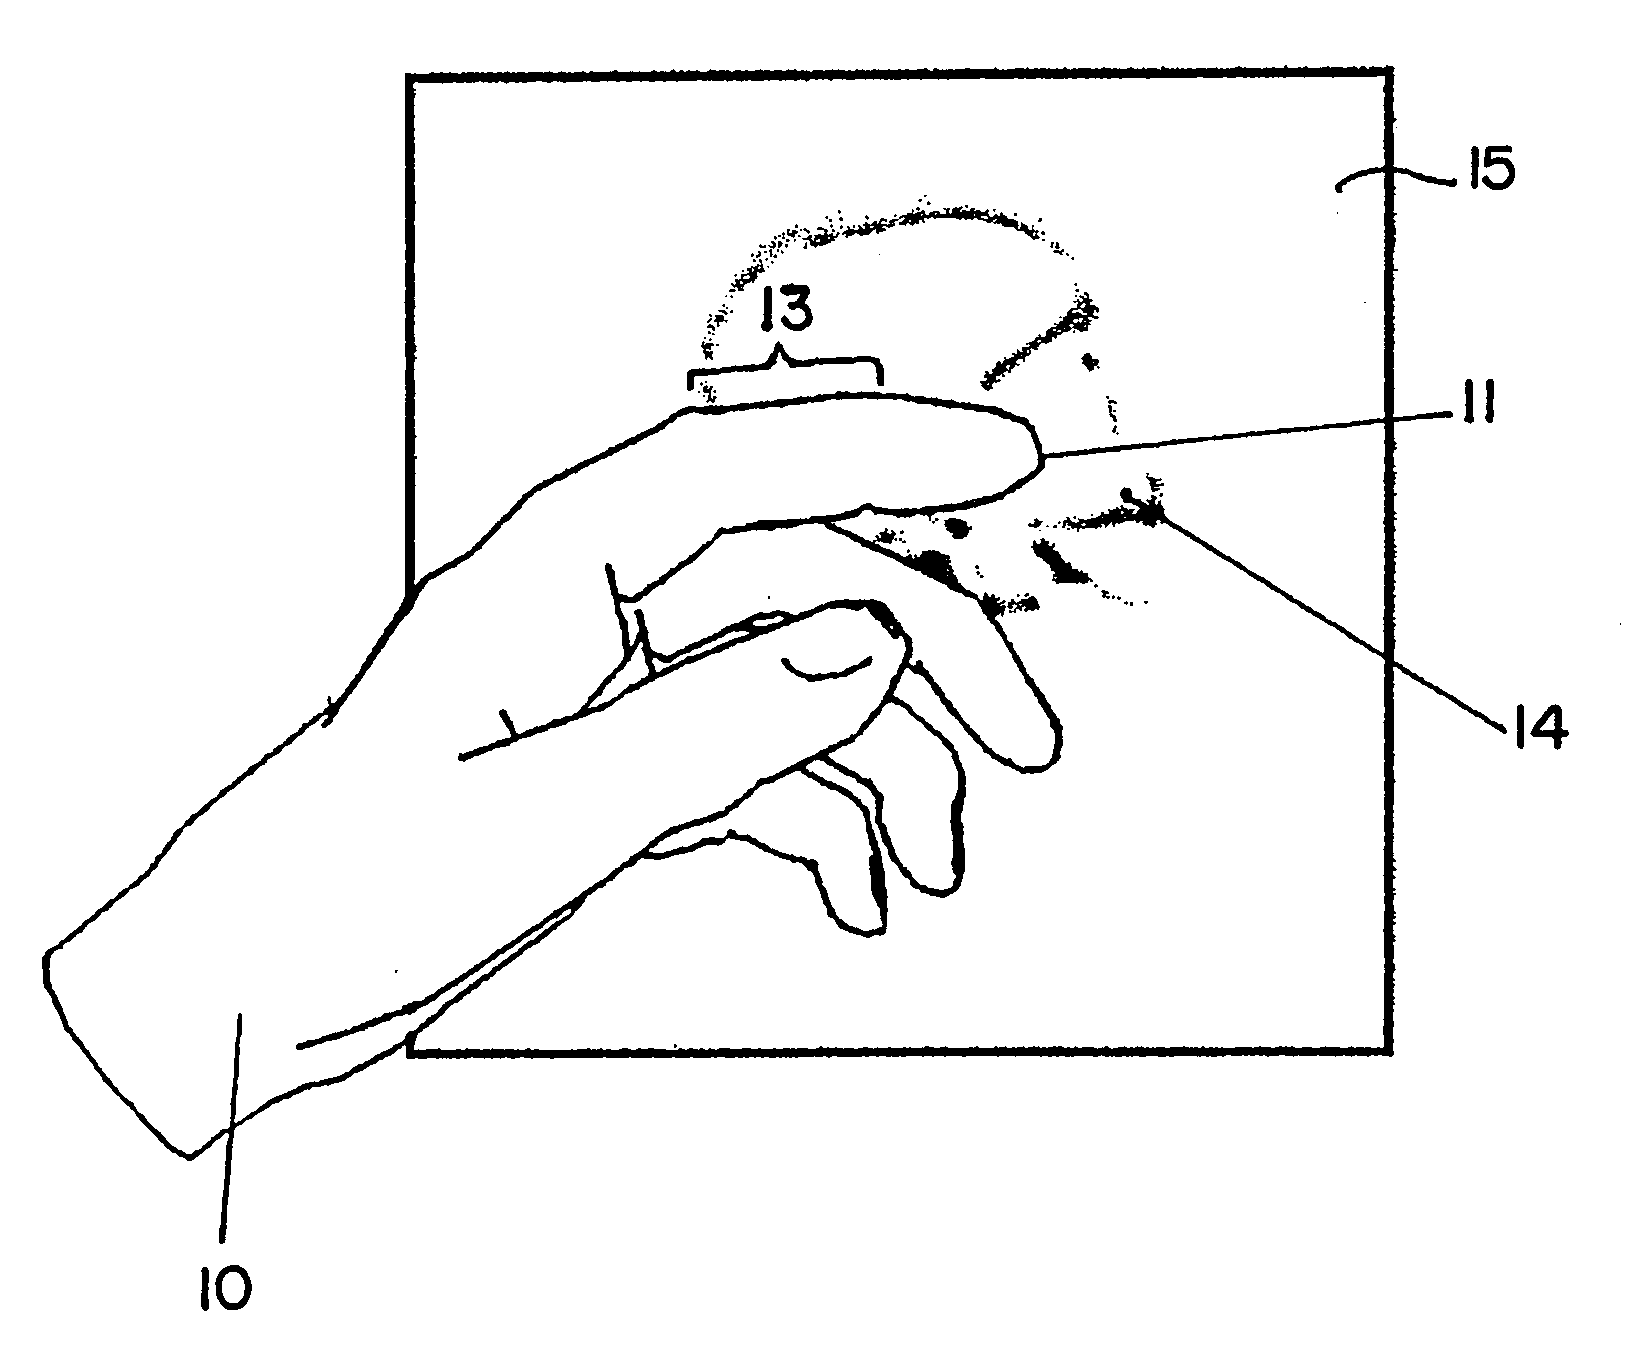 Method for displaying and/or processing image data of medical origin using gesture recognition